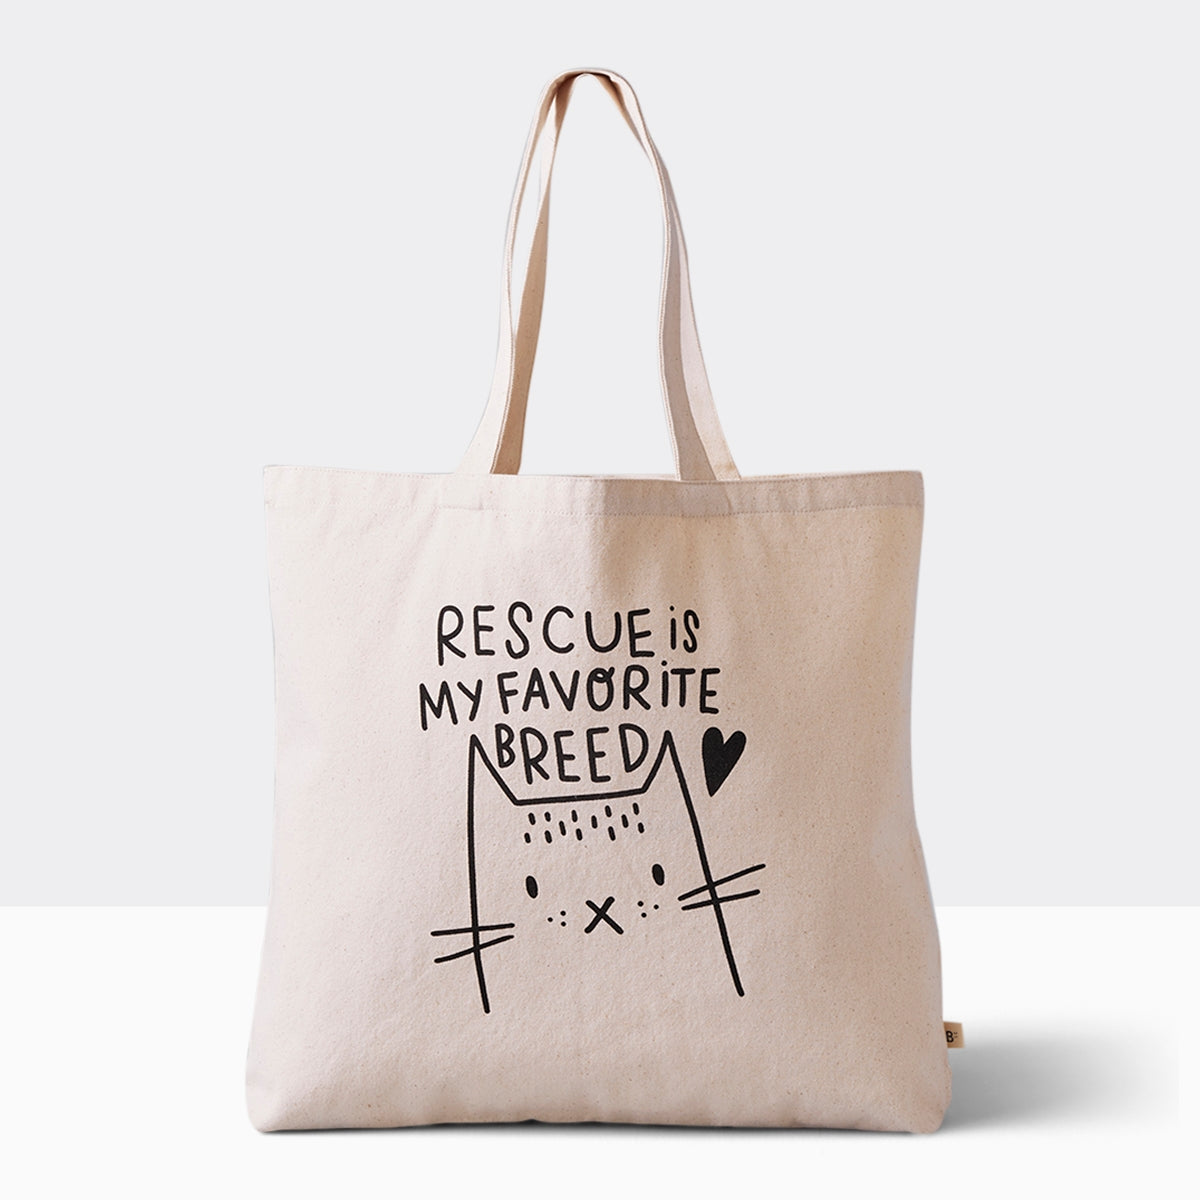 Spacious cotton canvas tote bag featuring a heartwarming cat illustration and the message 'Rescue is my favorite breed,' perfect for eco-conscious pet lovers. Bag is 17.5" wide and 15.5" tall with 10" drop handles, sitting on a plain white urface.